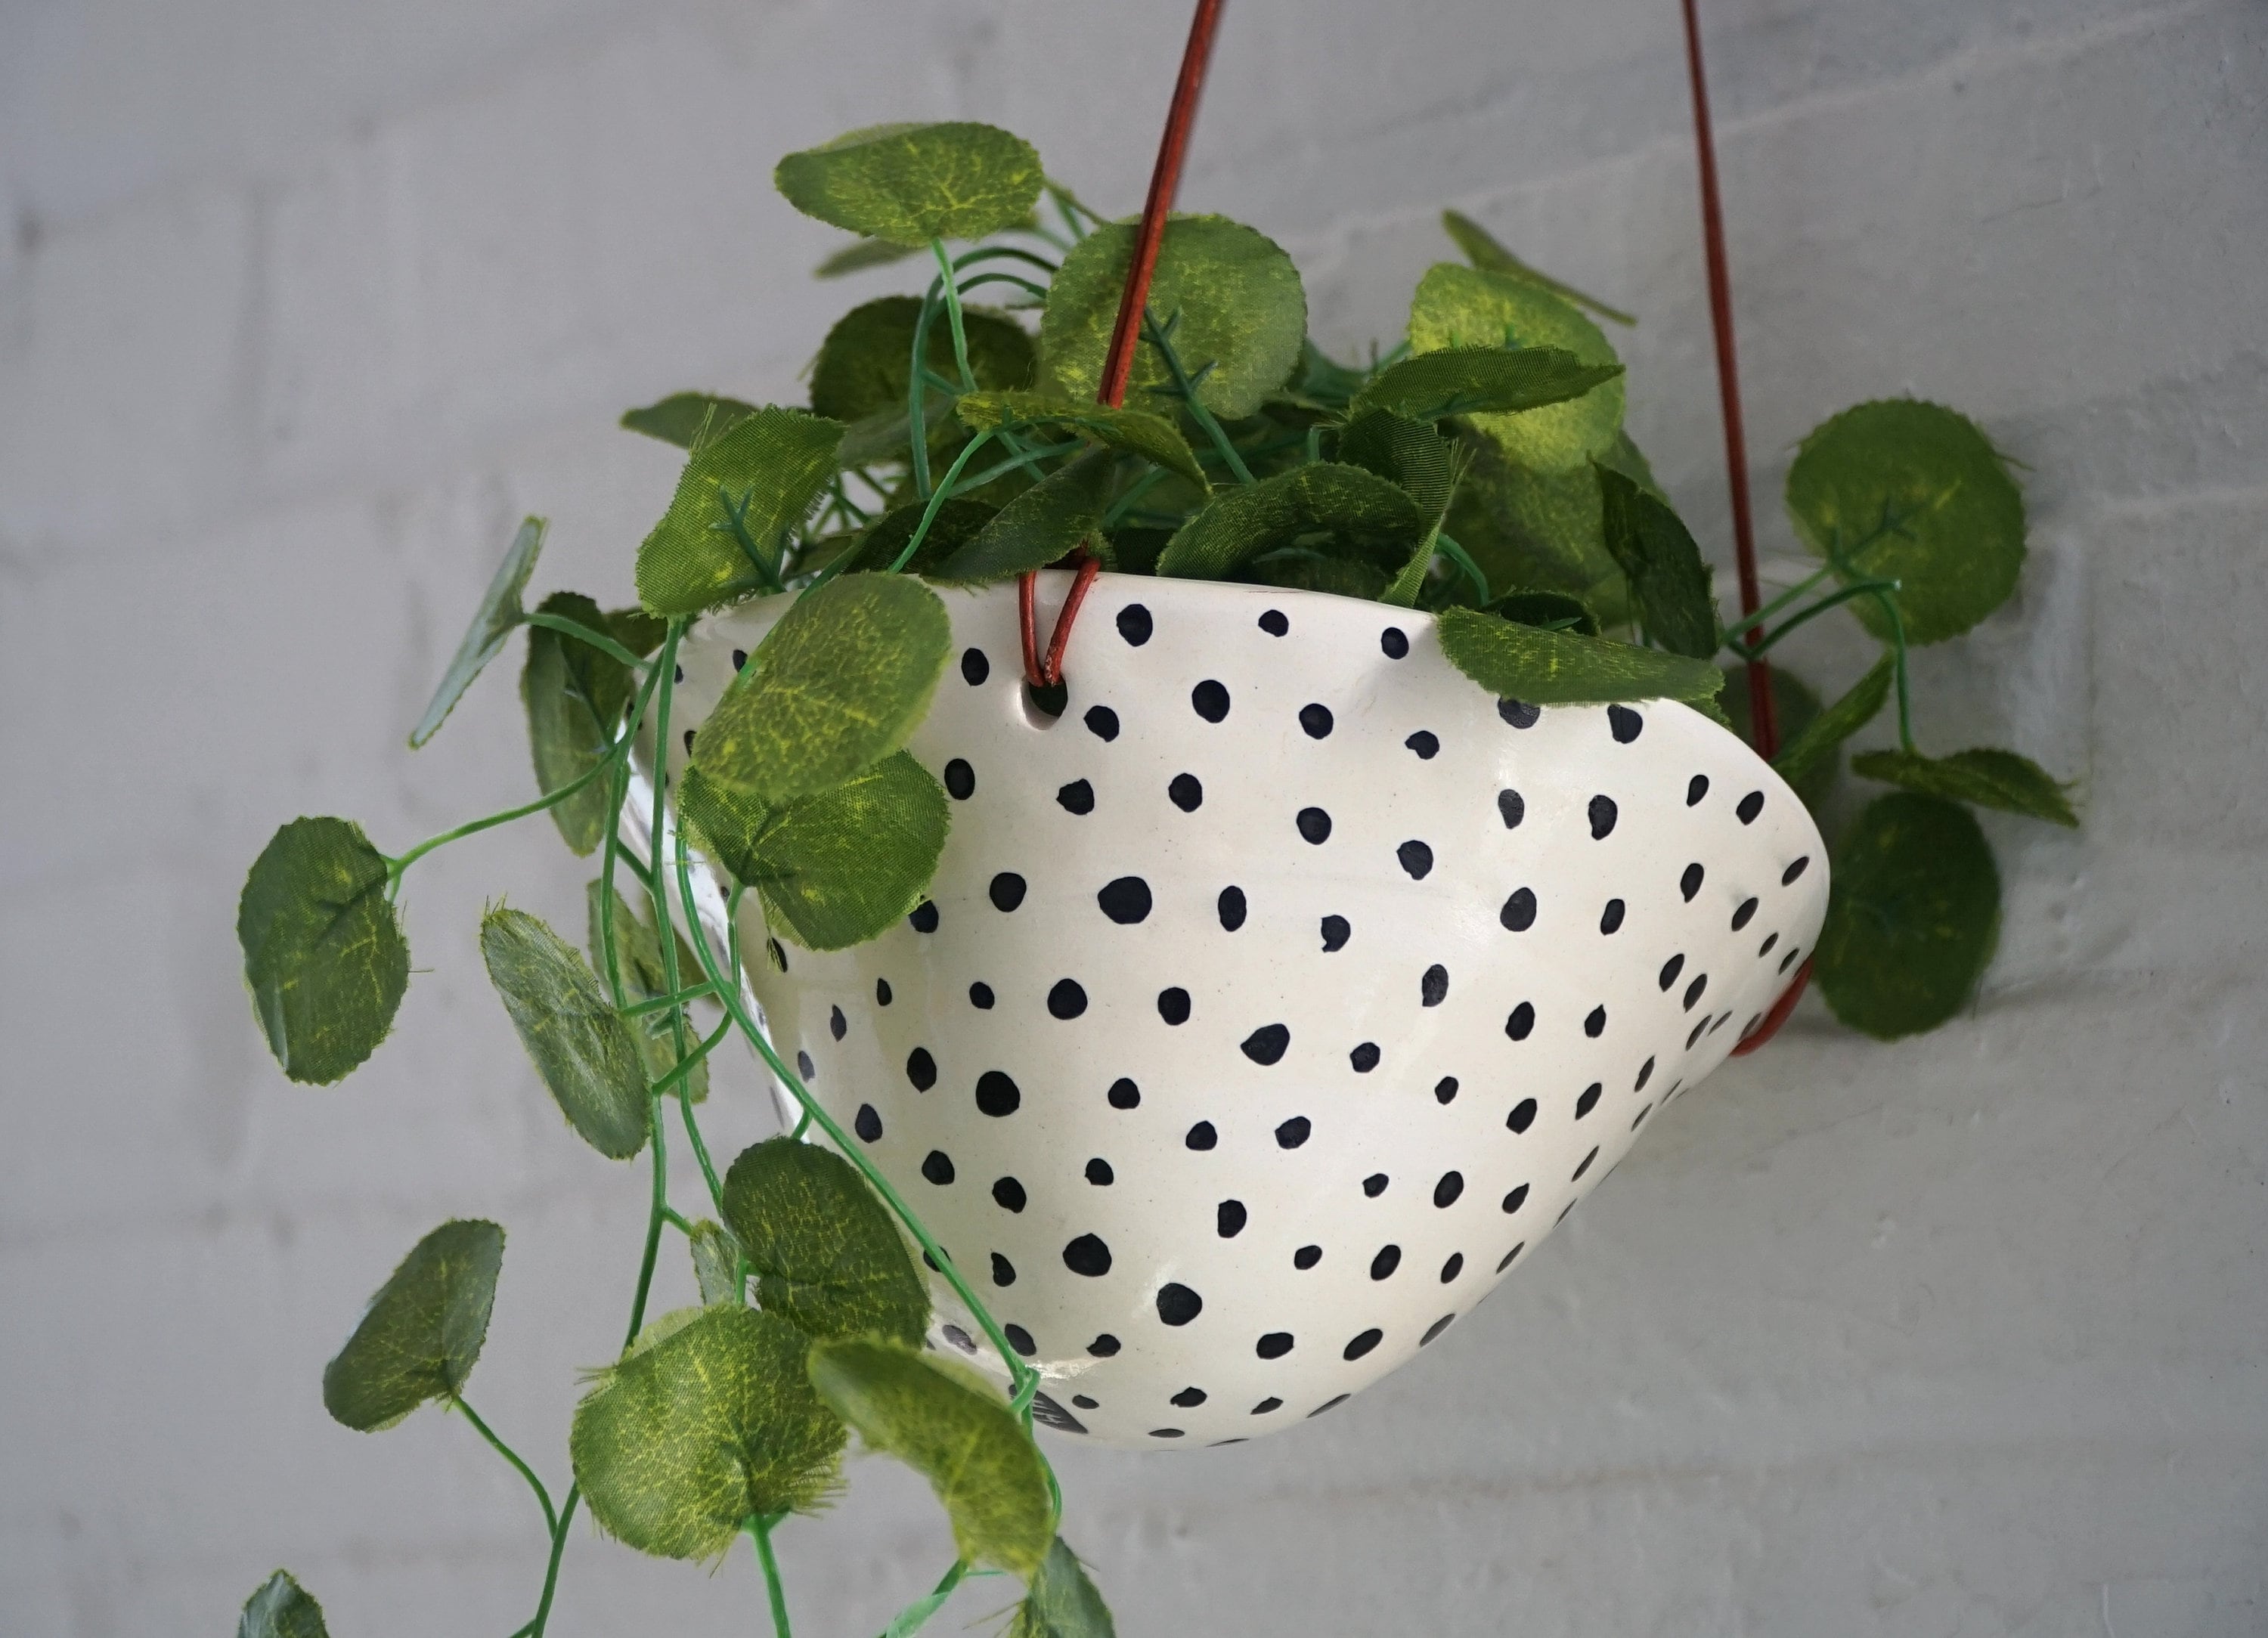 Black and White Glazed w/“Polka Dot” Design - Hanging Planter with Leather Cord - Classic Dotted Hanging Pot w/ Glossy Finish - Succulent Planter - Indoor Pot